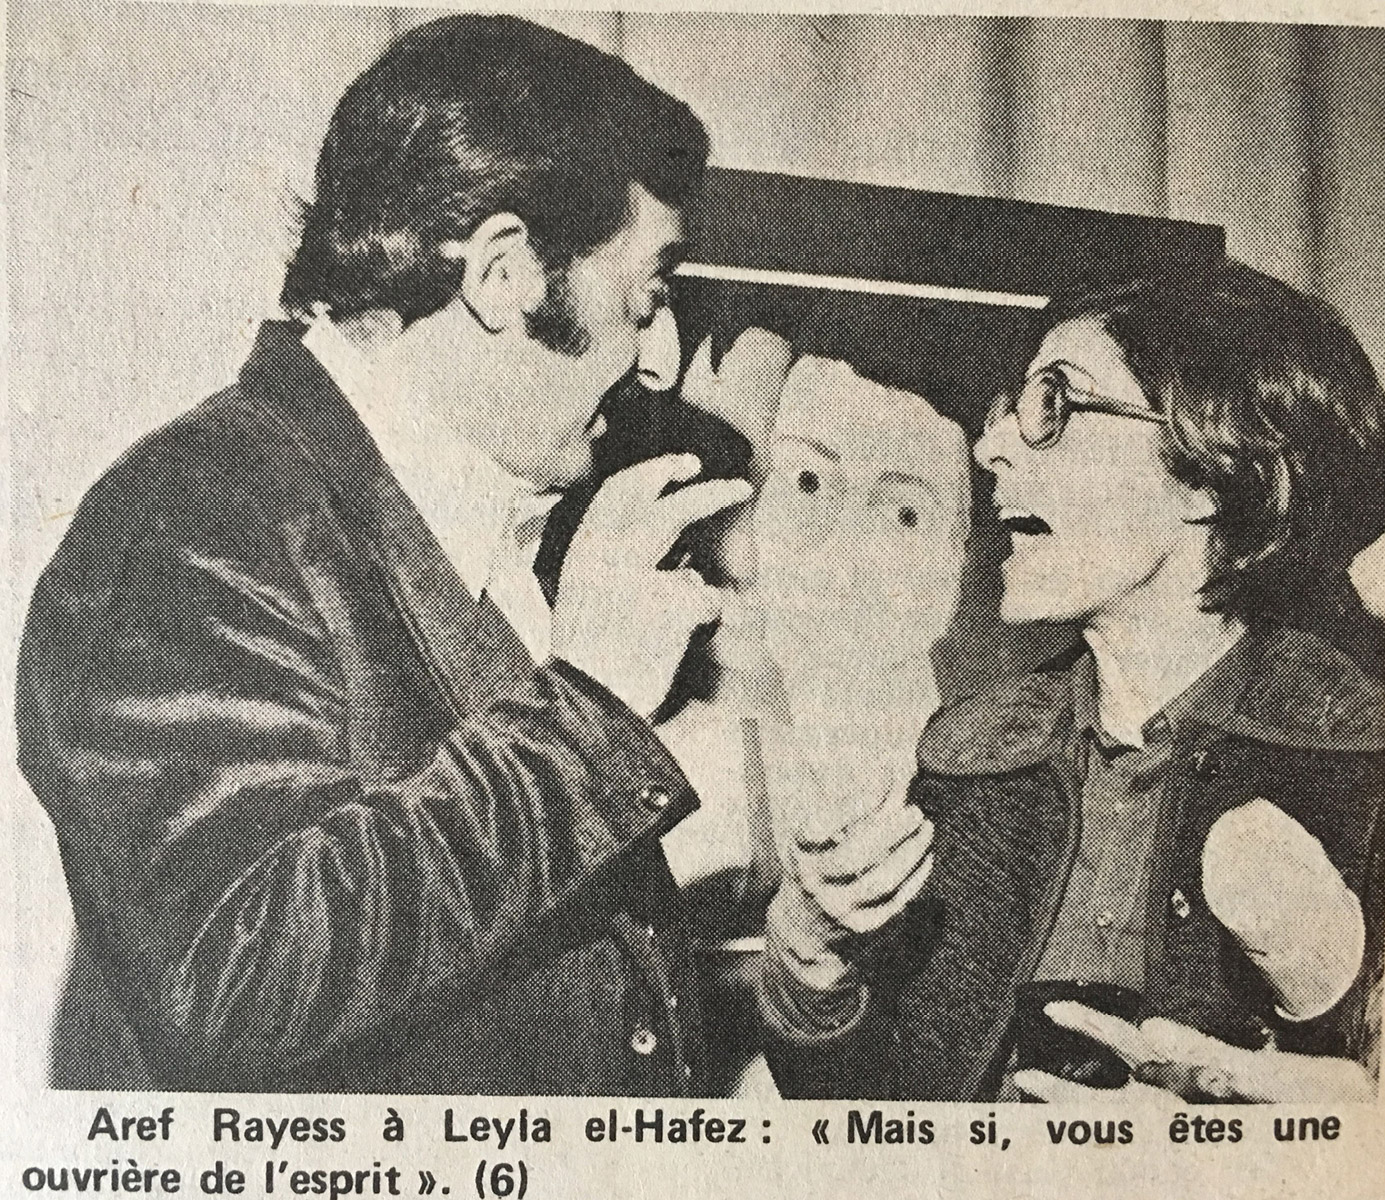 Photograph of Aref Rayess and Leyla El-Hafez at Contact Art Gallery,  February 1973. Courtesy Bibliotheque Nationale de France